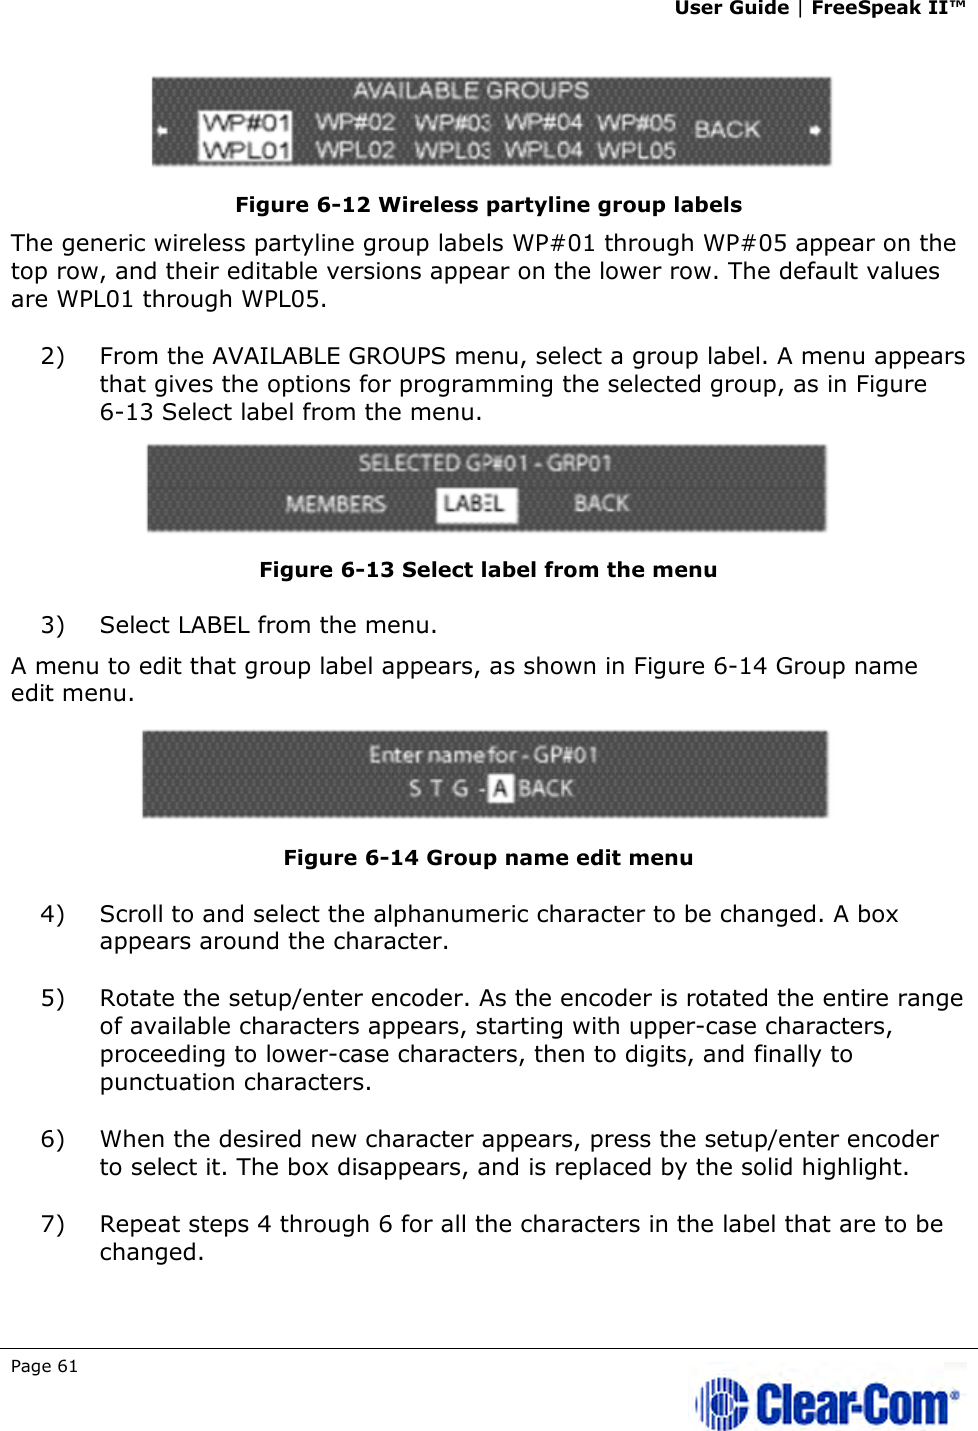 User Guide | FreeSpeak II™  Page 61      Figure 6-12 Wireless partyline group labels The generic wireless partyline group labels WP#01 through WP#05 appear on the top row, and their editable versions appear on the lower row. The default values are WPL01 through WPL05. 2) From the AVAILABLE GROUPS menu, select a group label. A menu appears that gives the options for programming the selected group, as in Figure 6-13 Select label from the menu.  Figure 6-13 Select label from the menu 3) Select LABEL from the menu.  A menu to edit that group label appears, as shown in Figure 6-14 Group name edit menu.  Figure 6-14 Group name edit menu 4) Scroll to and select the alphanumeric character to be changed. A box appears around the character. 5) Rotate the setup/enter encoder. As the encoder is rotated the entire range of available characters appears, starting with upper-case characters, proceeding to lower-case characters, then to digits, and finally to punctuation characters.  6) When the desired new character appears, press the setup/enter encoder to select it. The box disappears, and is replaced by the solid highlight. 7) Repeat steps 4 through 6 for all the characters in the label that are to be changed.  